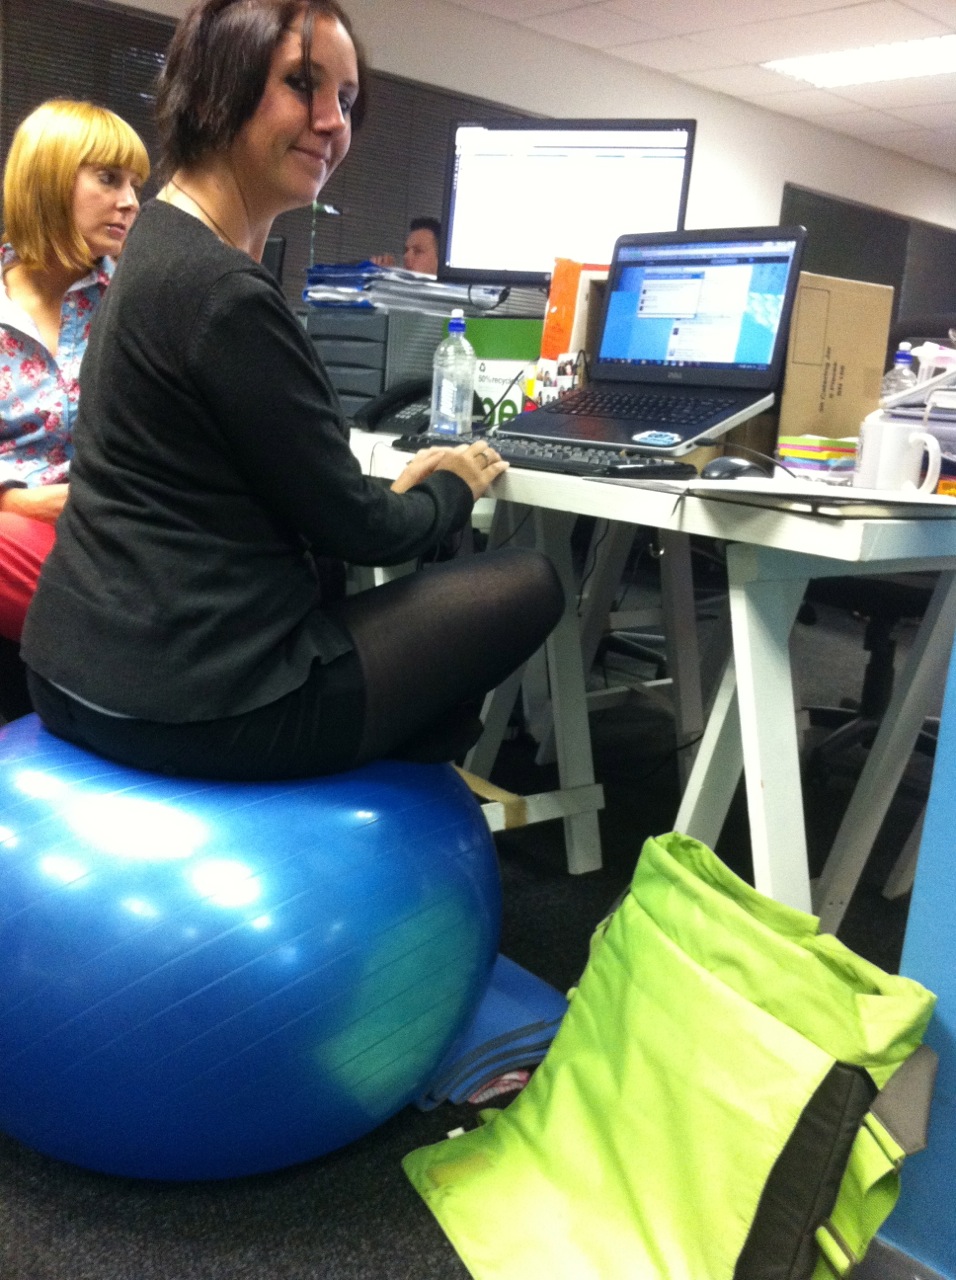 sitting on exercise ball at work